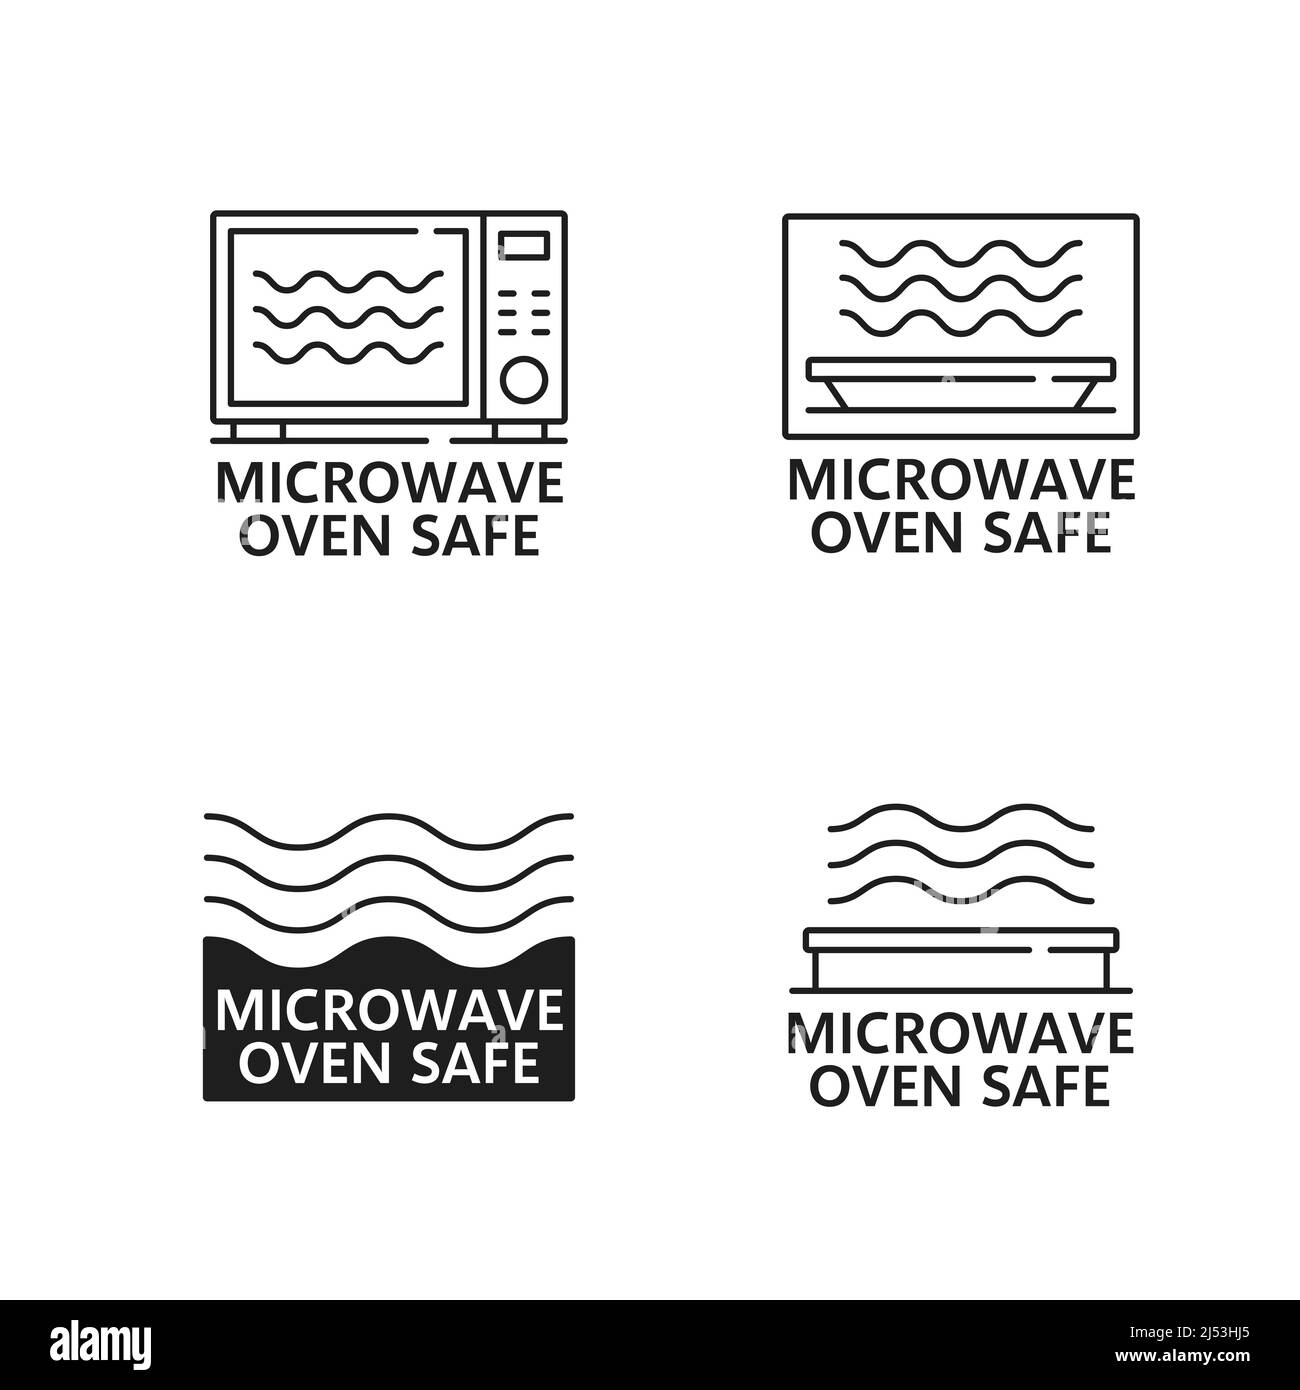 Microwave oven safe icons and signs. Vector electric oven, food cooking and heating containers with electromagnetic radiation waves, symbols of microwave safety for plastic or glass kitchen utensil Stock Vector